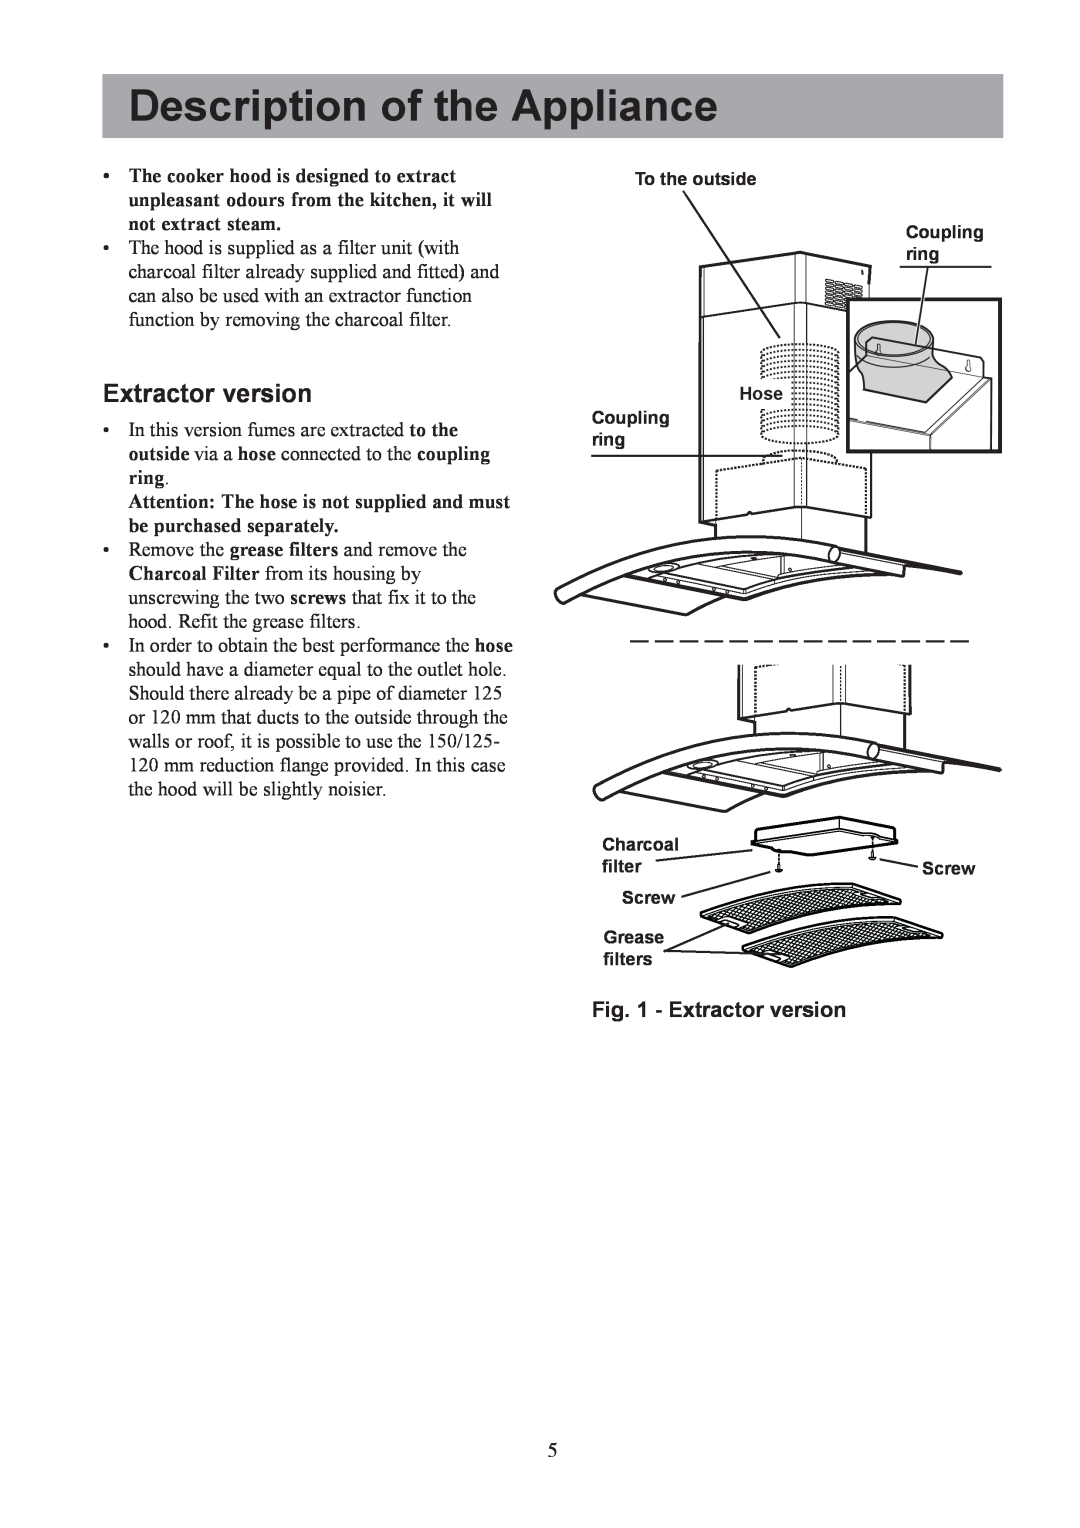 Electrolux CH 700 user manual Description of the Appliance, Extractor version 